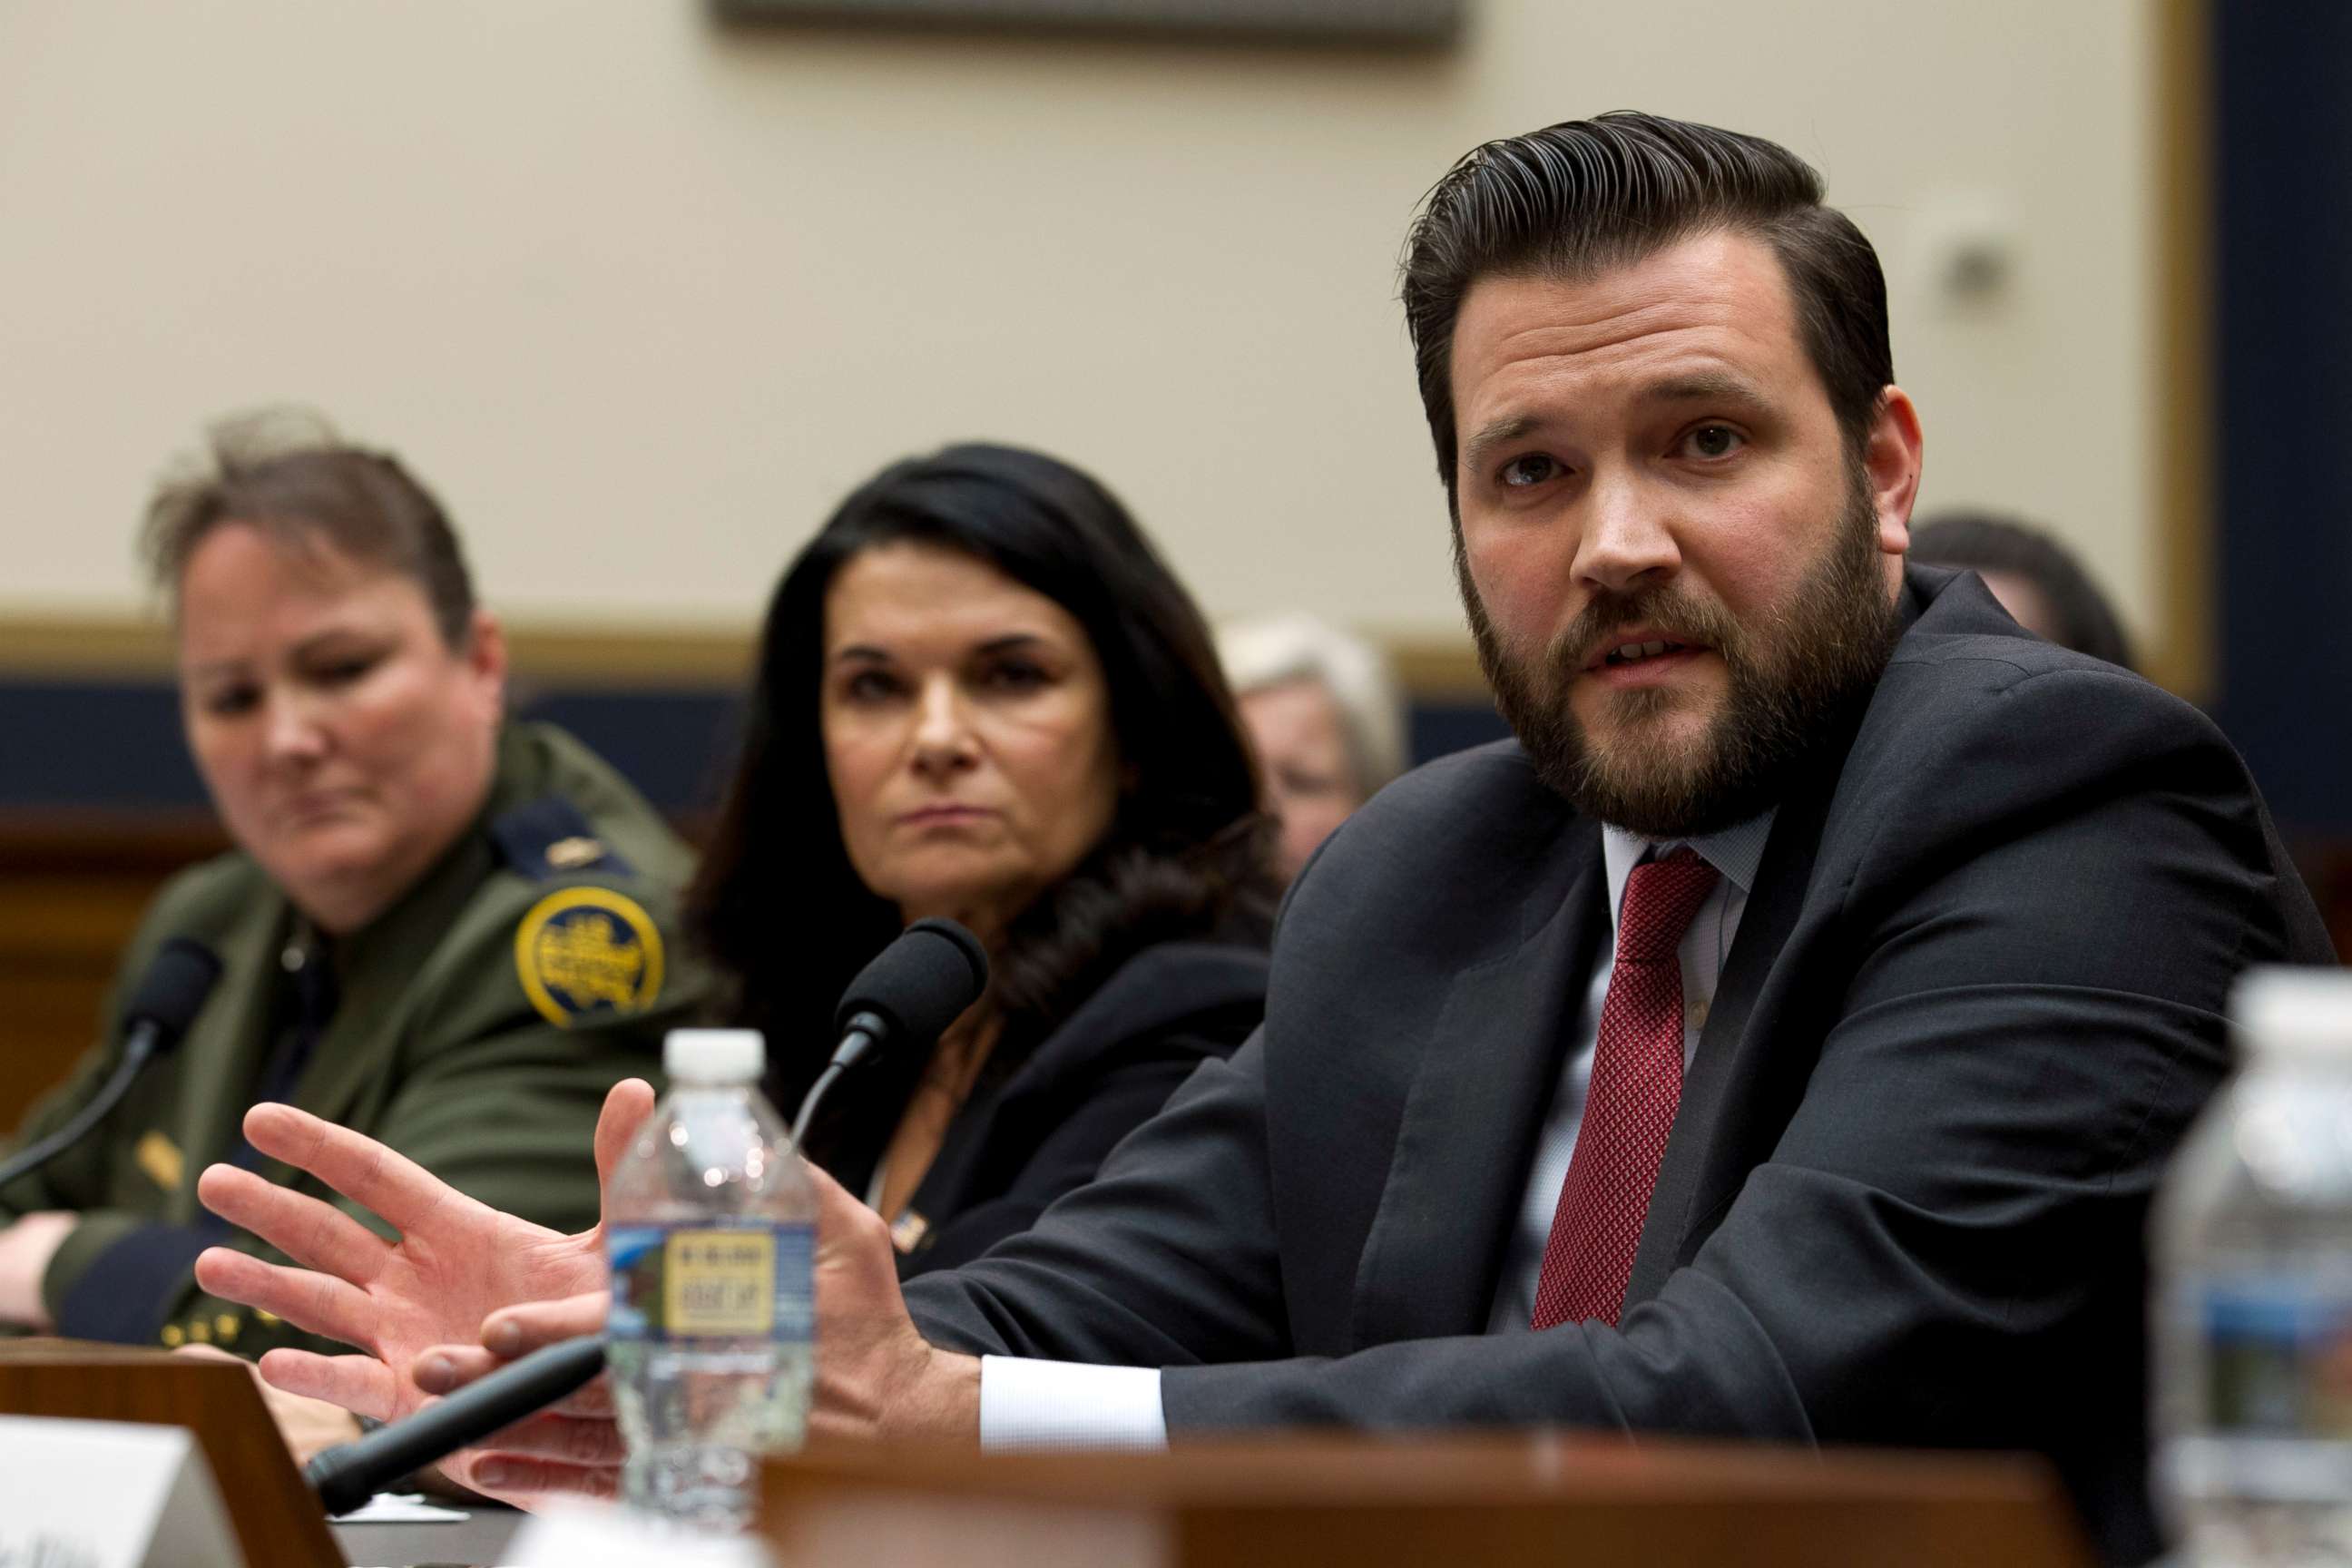 PHOTO: Senior adviser for the Department of Health and Human Services Scott Lloyd testifies before the House Judiciary Committee on Capitol Hill in Washington, Feb. 26, 2019.